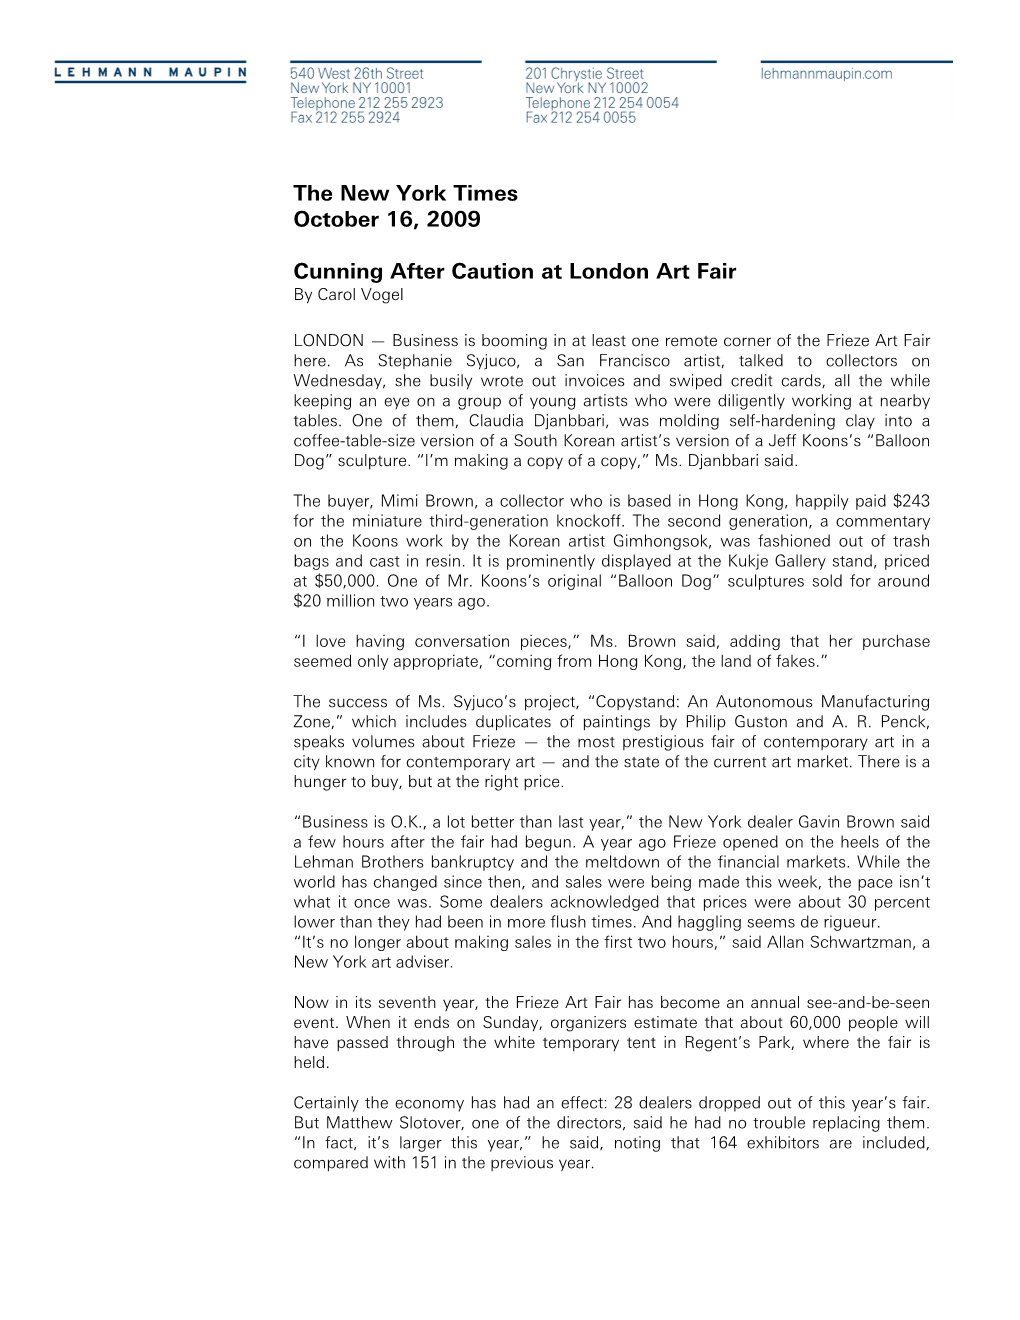 TE-Nytimes 10.16.09 Text